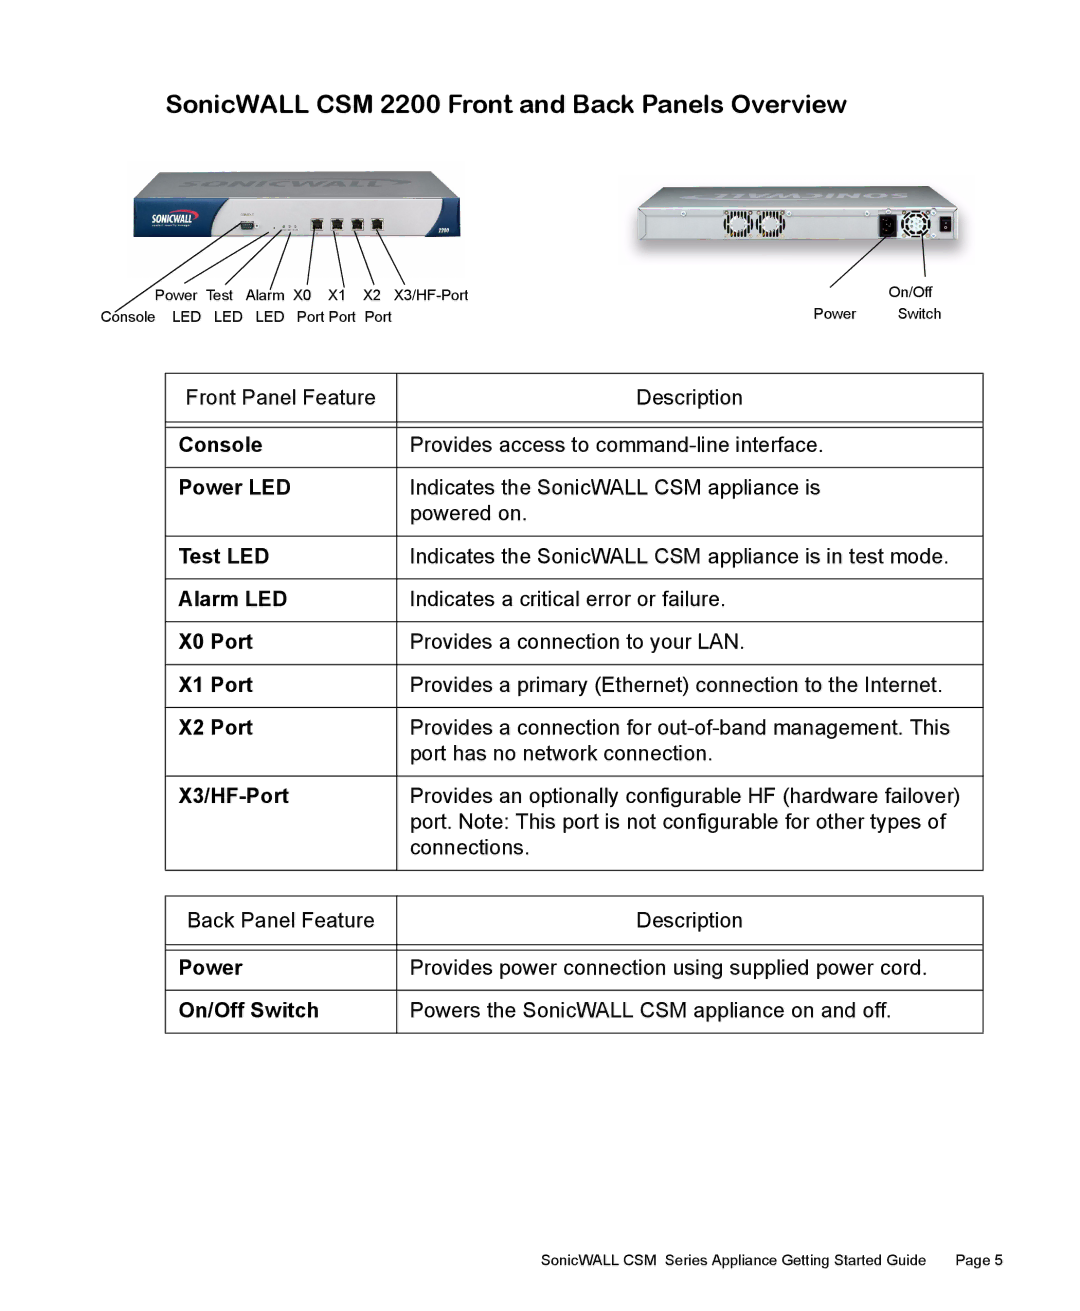 SonicWALL manual SonicWALL CSM 2200 Front and Back Panels Overview, X3/HF-Port 